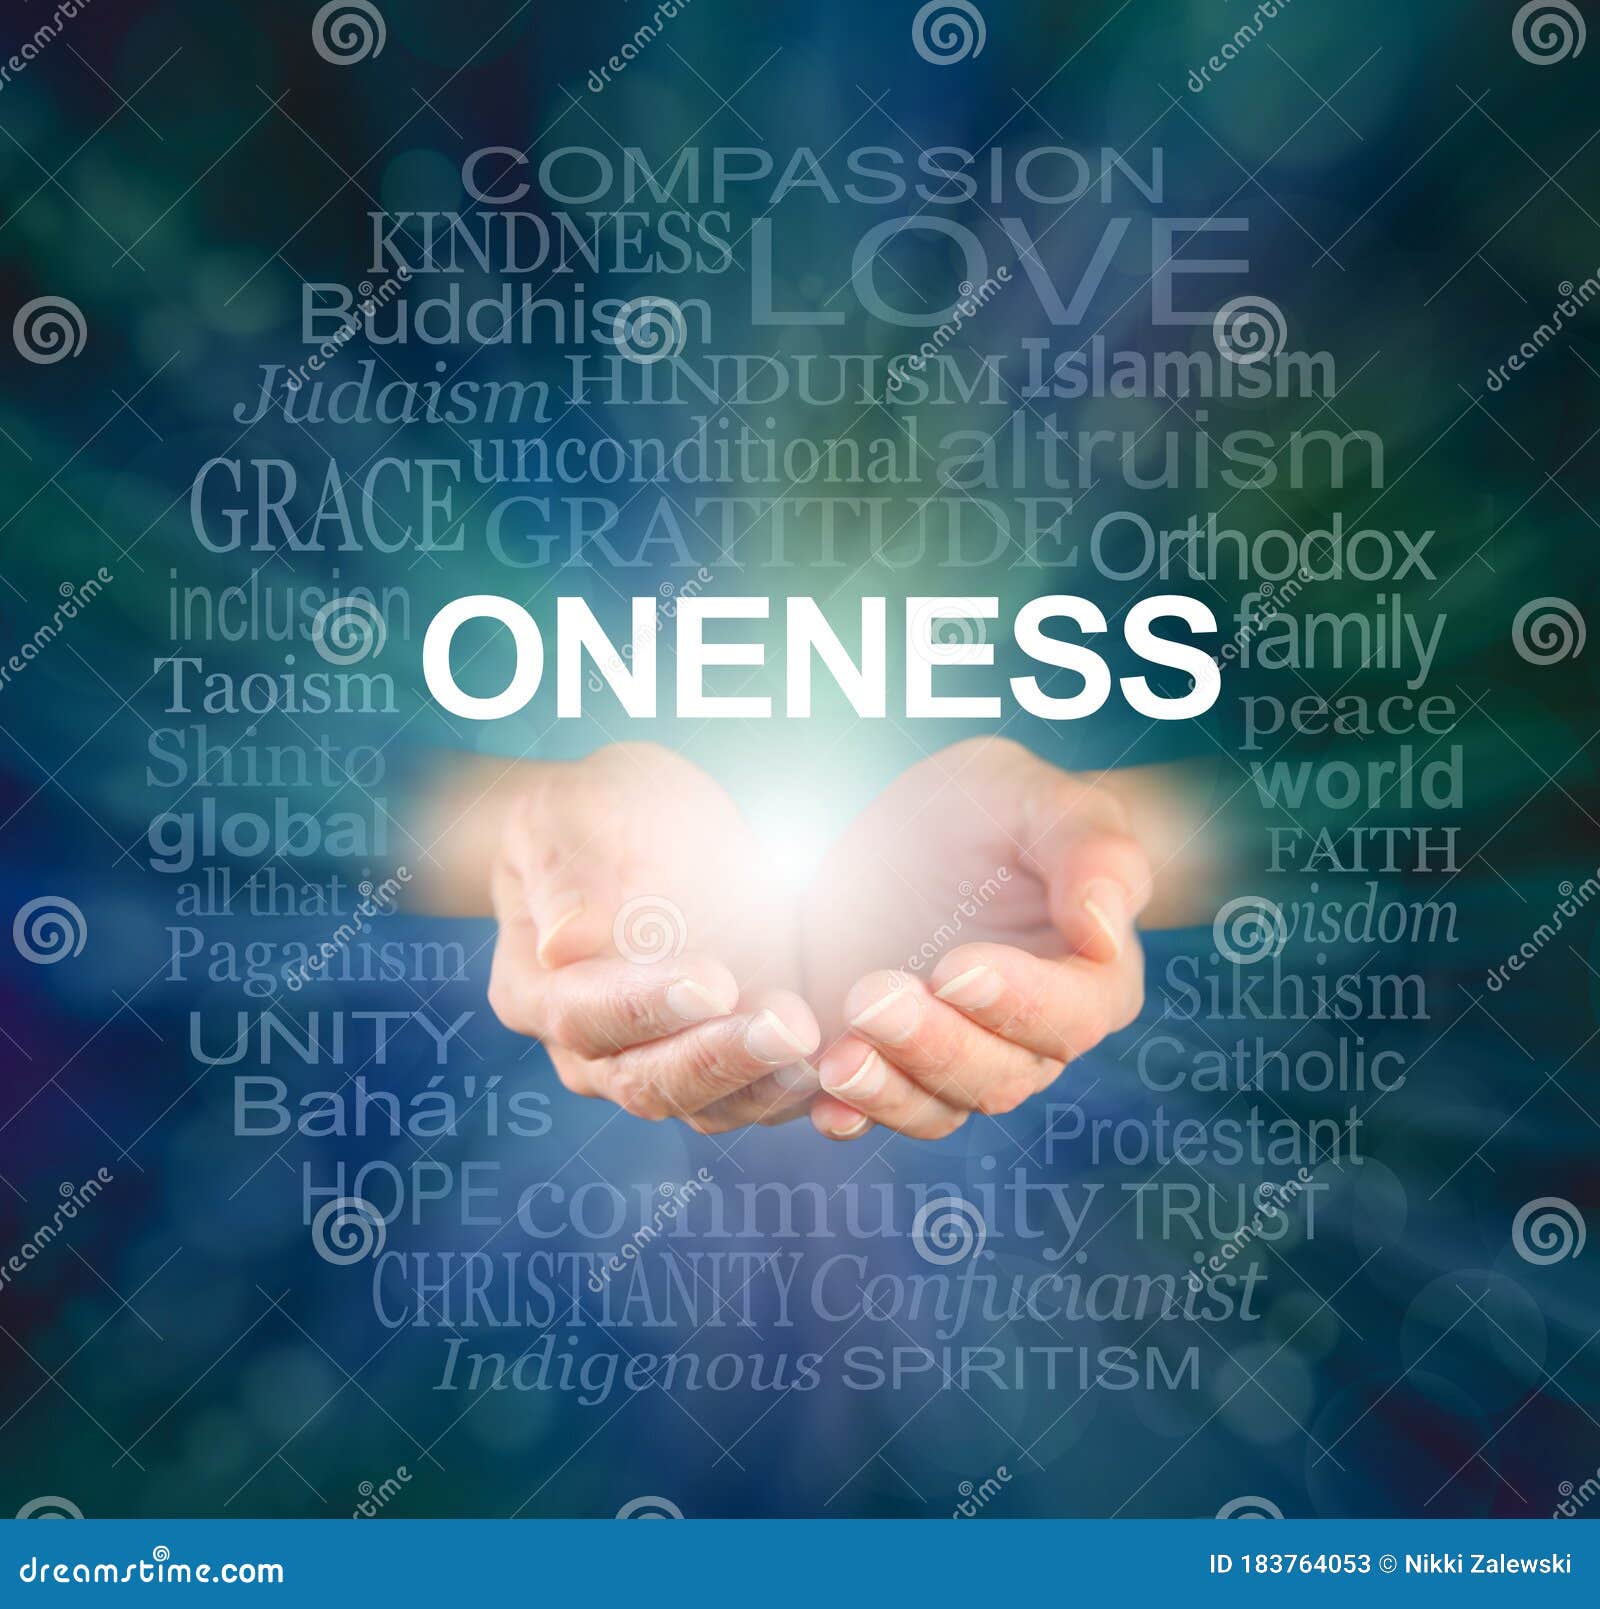 oneness words of wisdom tag cloud